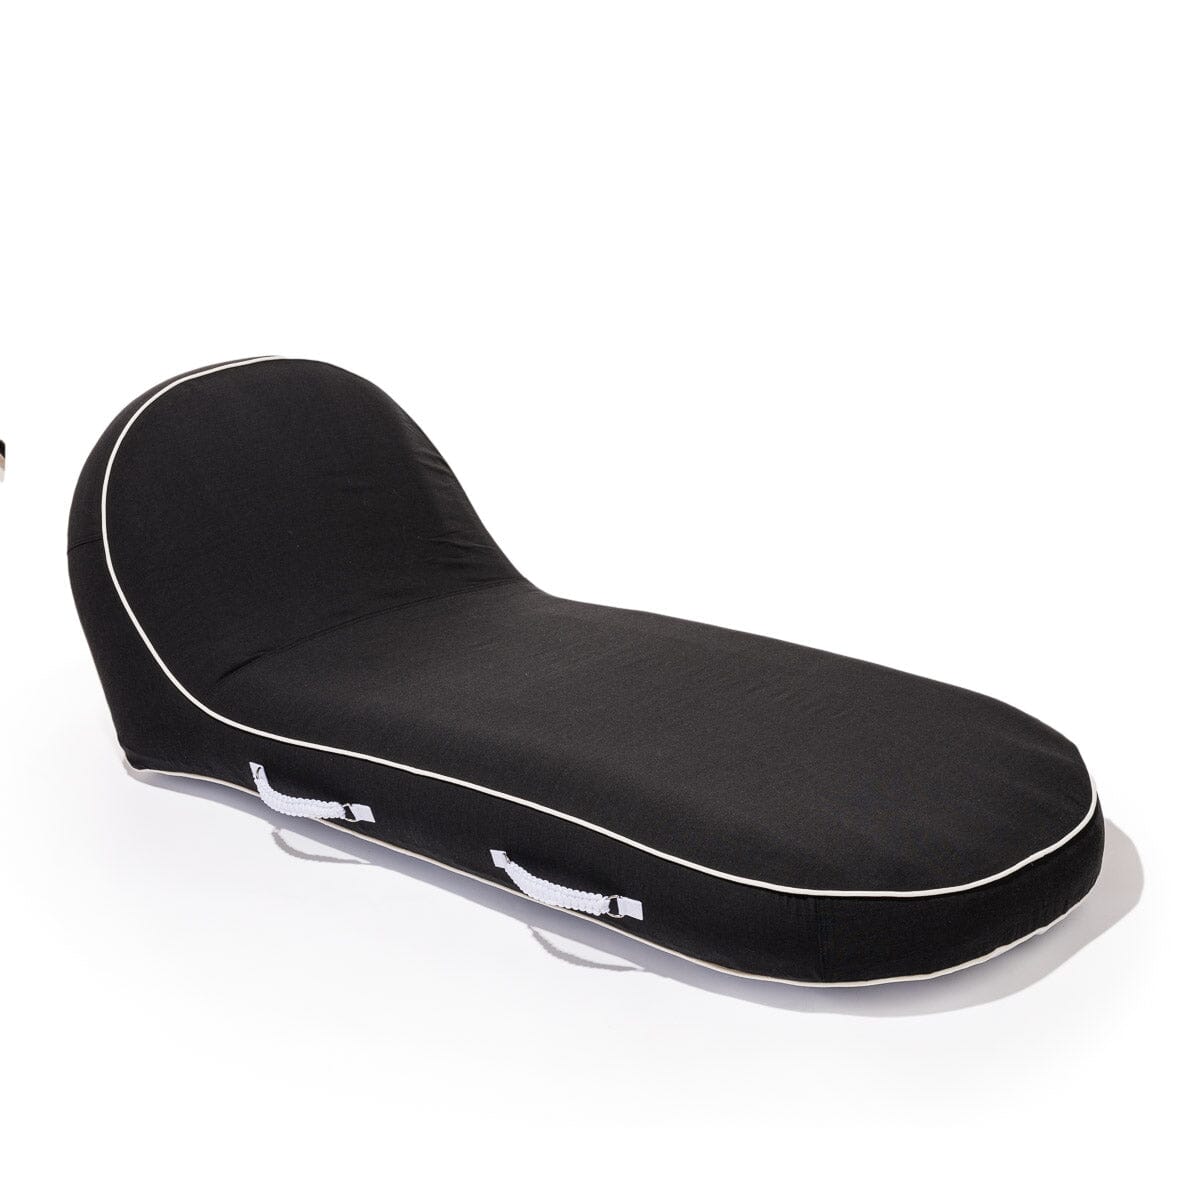 The Pool Lounger - Rivie Black Pool Lounger Business & Pleasure Co 